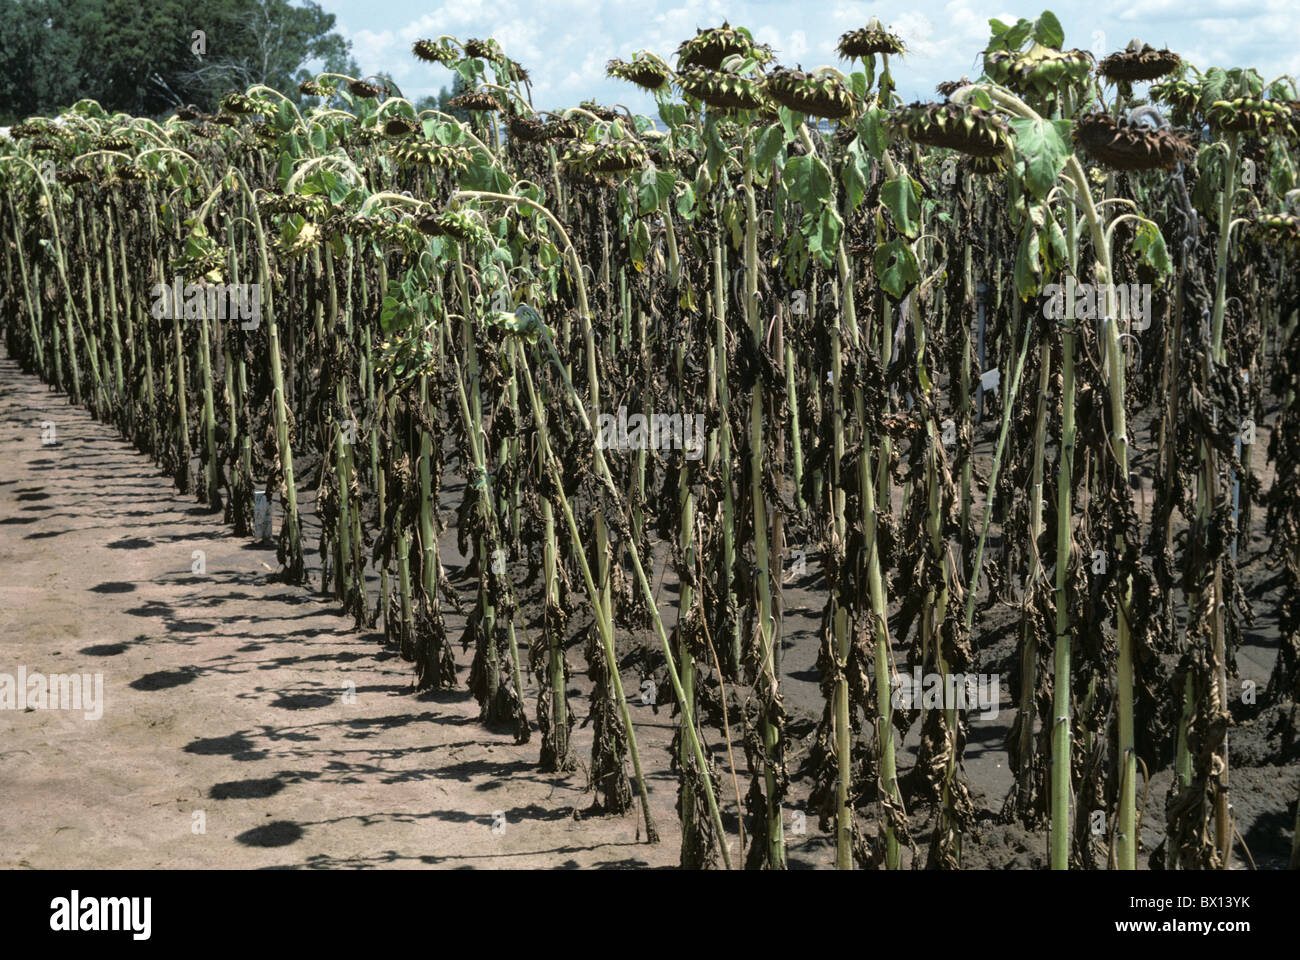 Sunflower crop defoliated and severely affected by leaf blight (Alternaria helianthi), South Africa Stock Photo